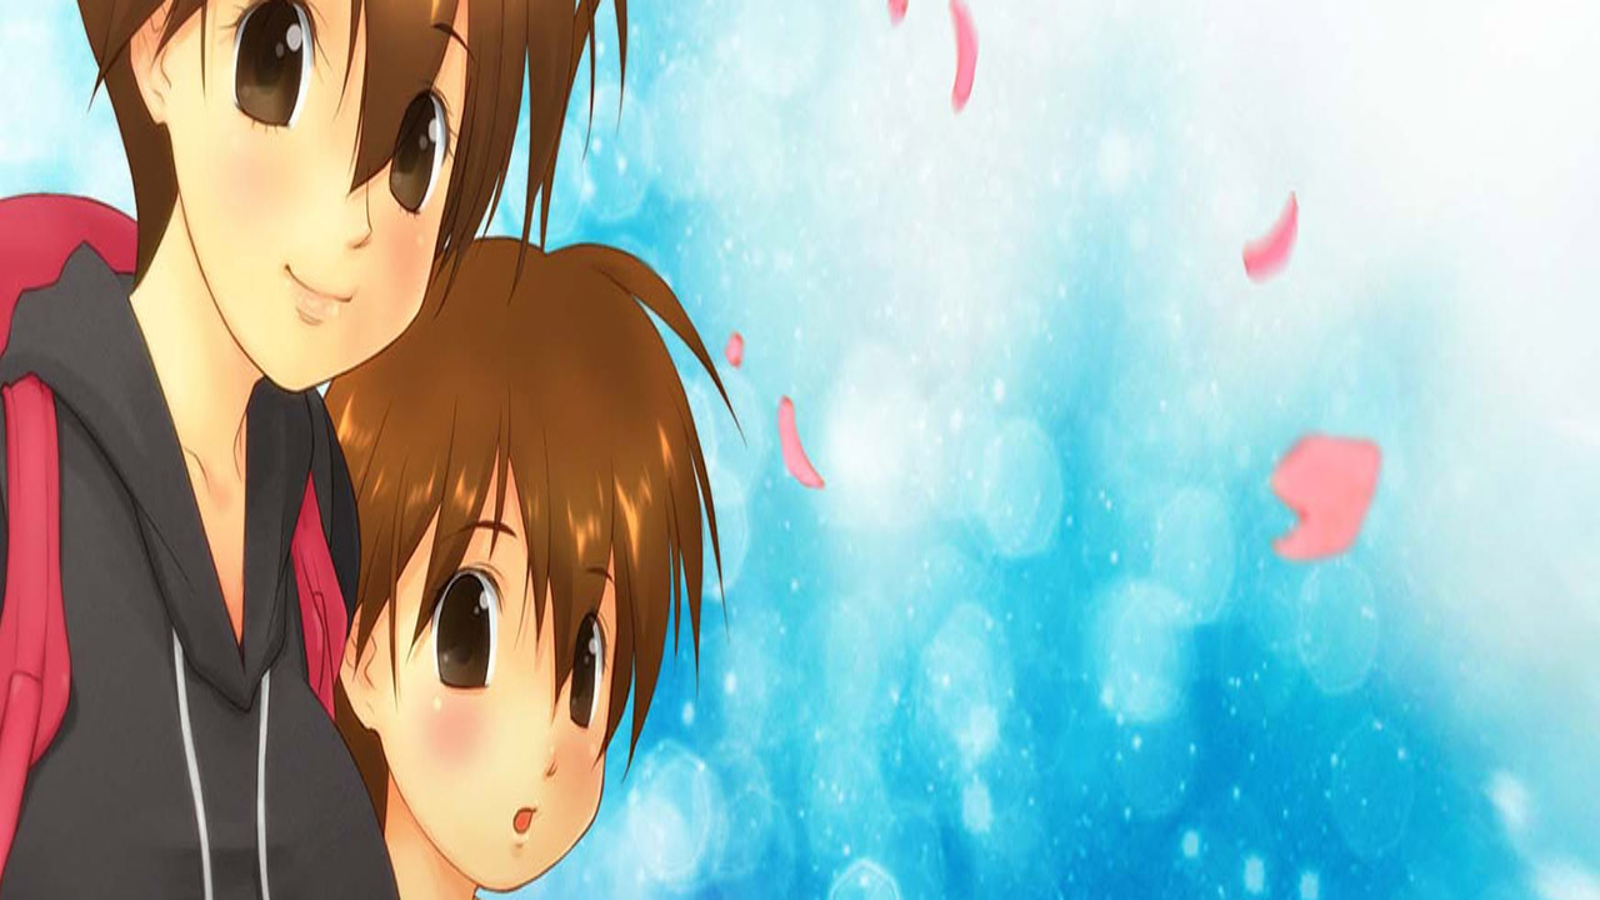 Clannad anime boy floating in water